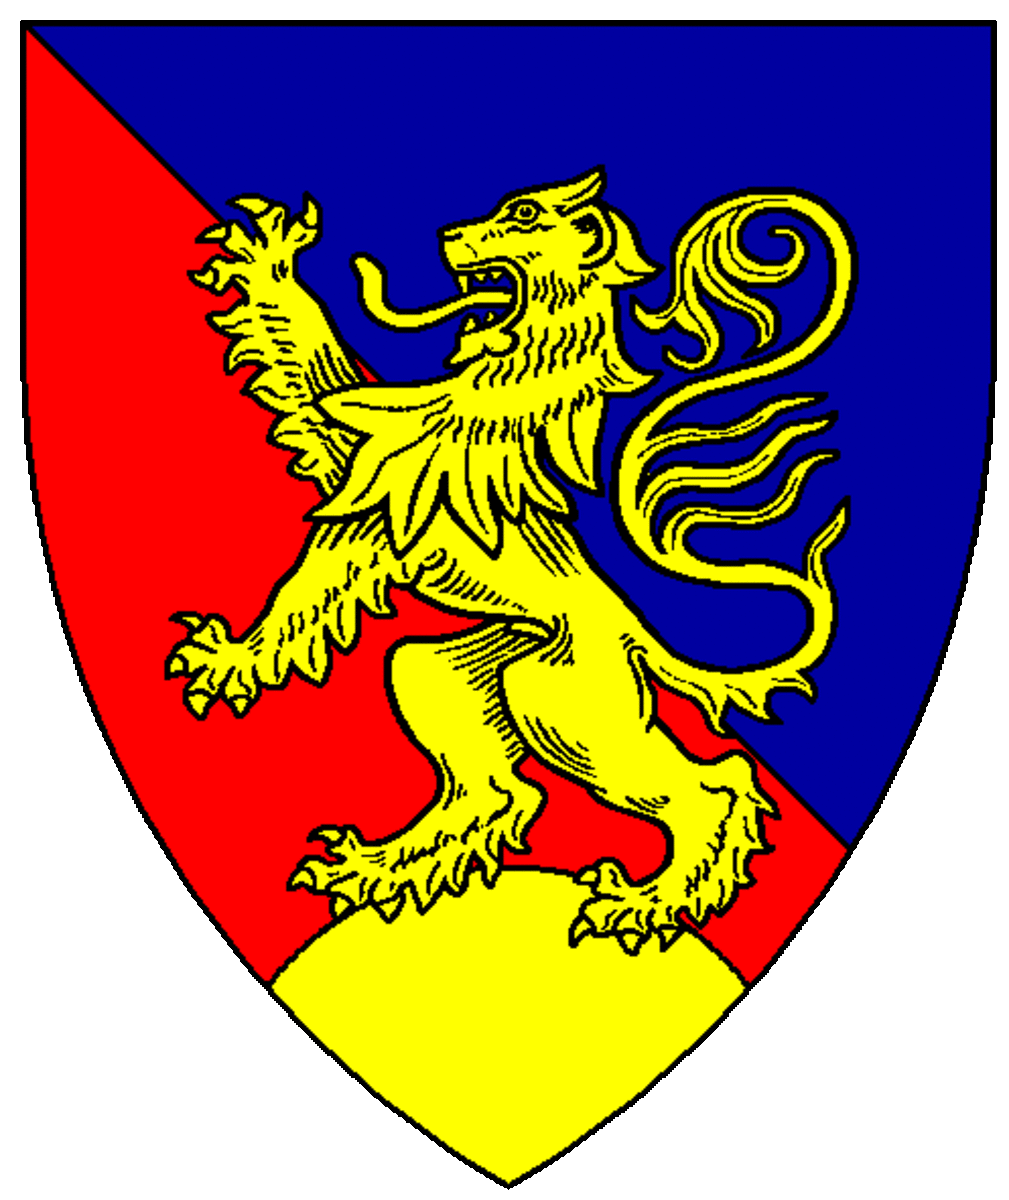 The coat of arms of Llywelyn ap Madog